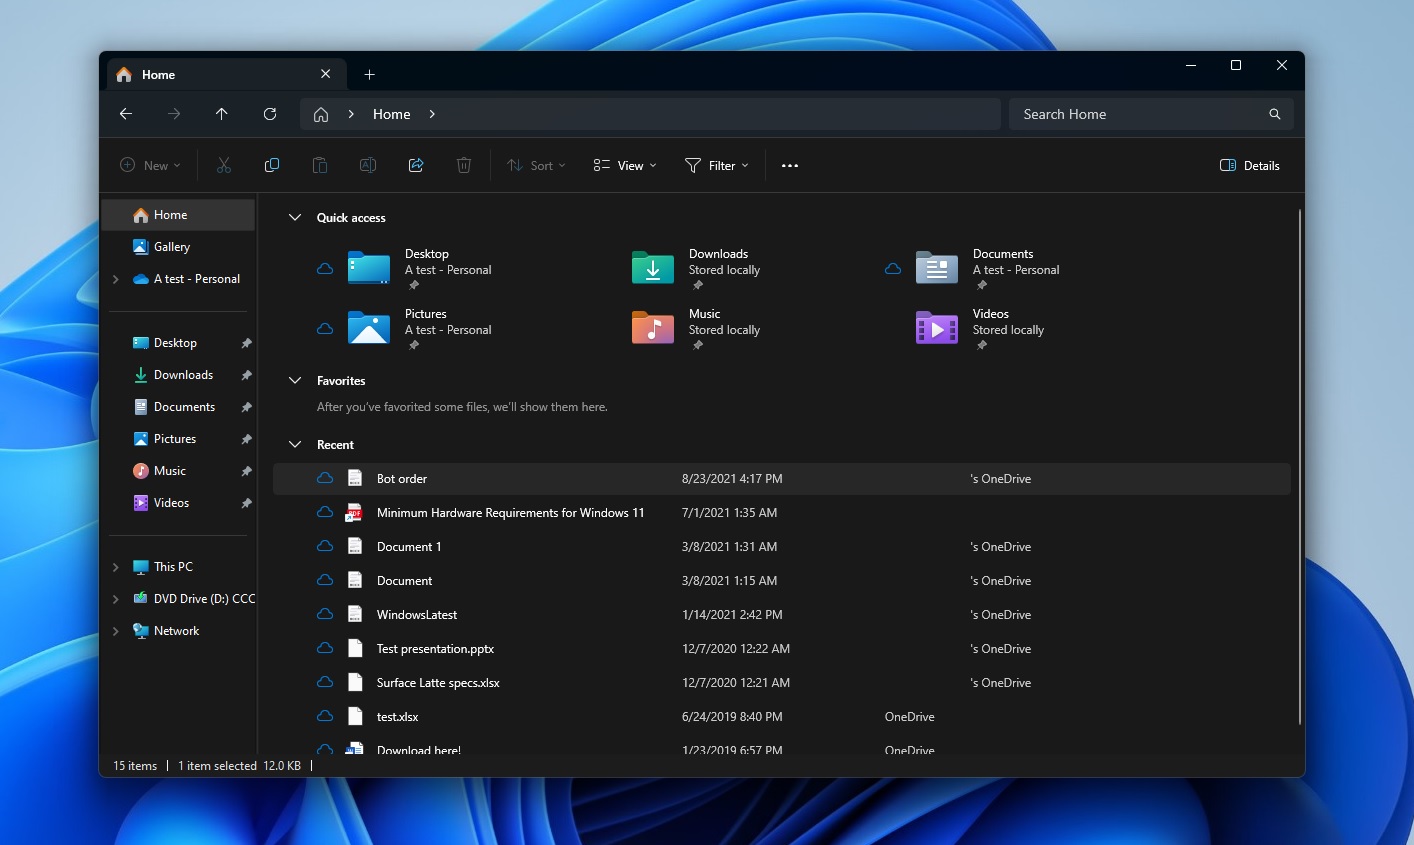 Redesigned File Explorer interface